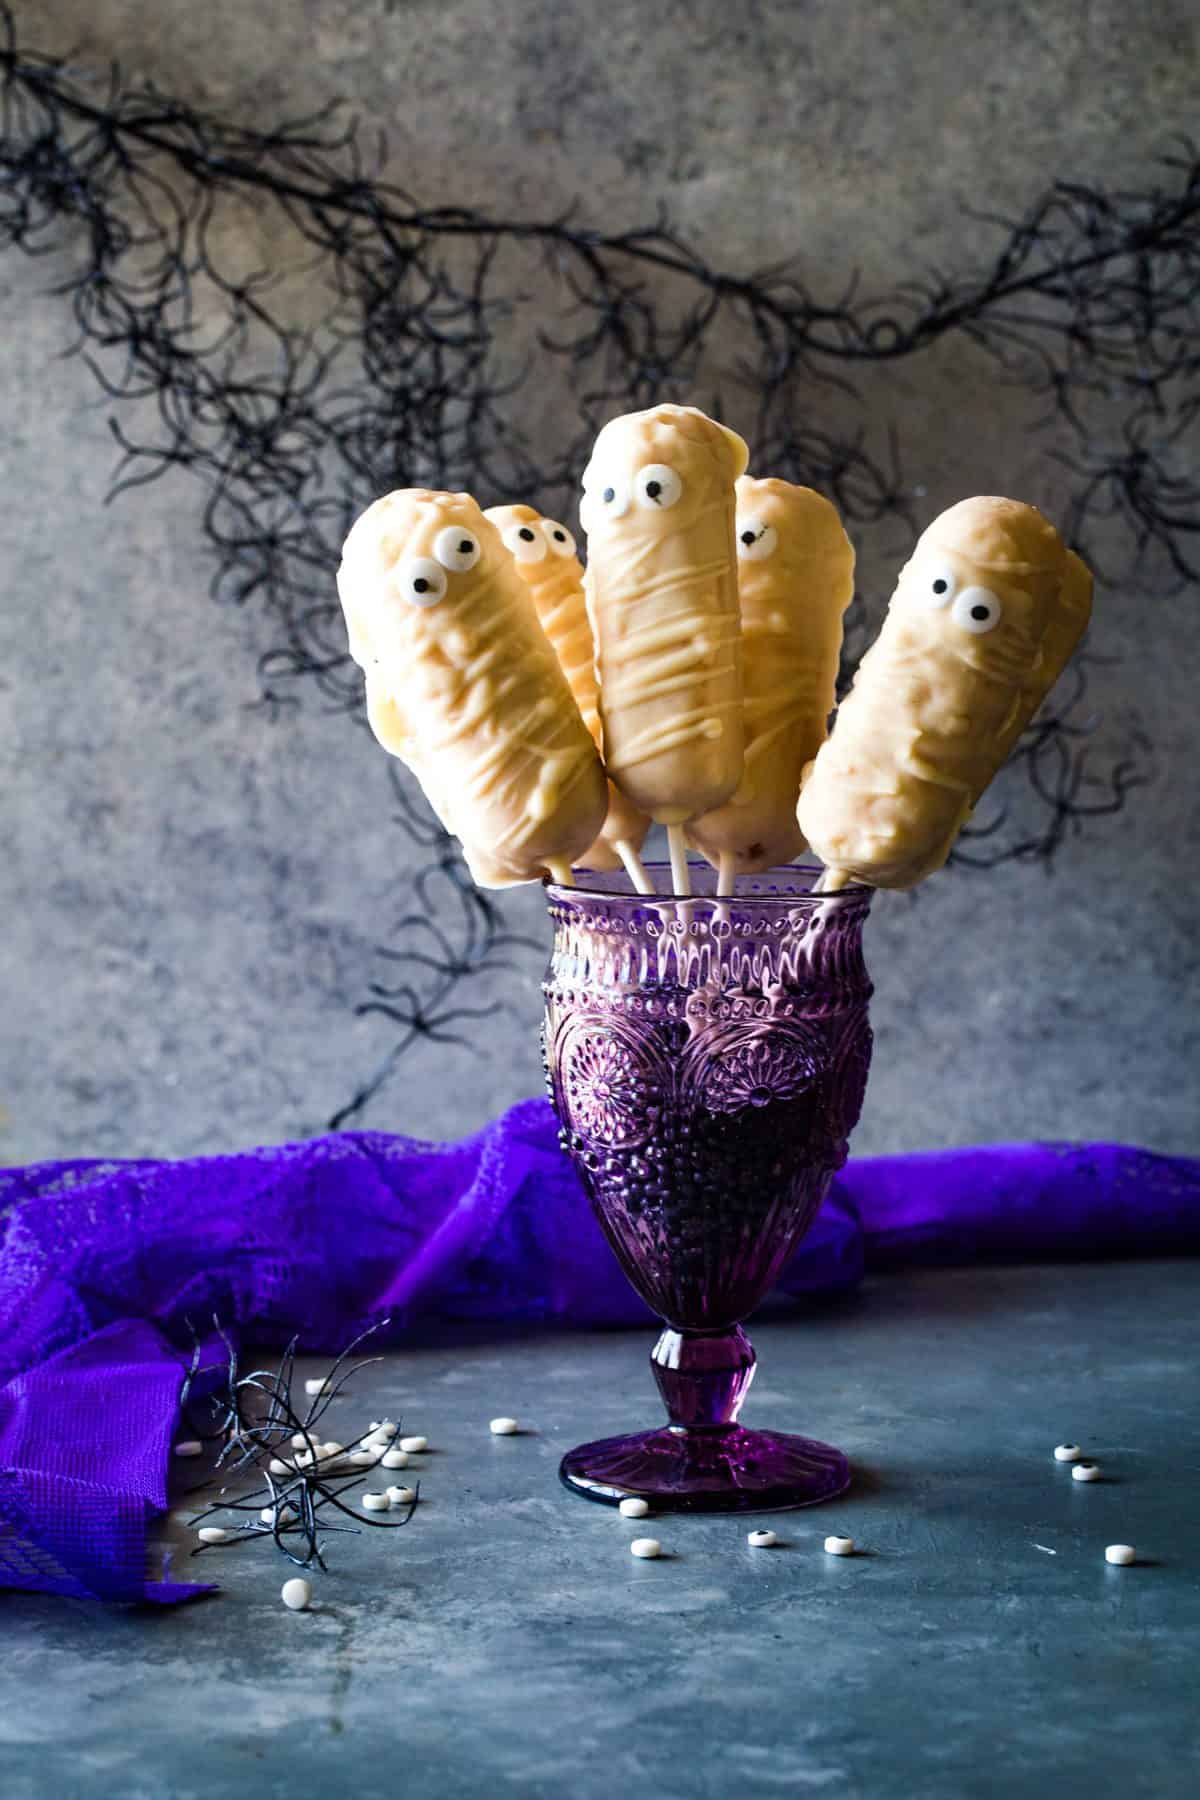 Twinkie dipped mummies on sticks in a purple glass on silver background. 